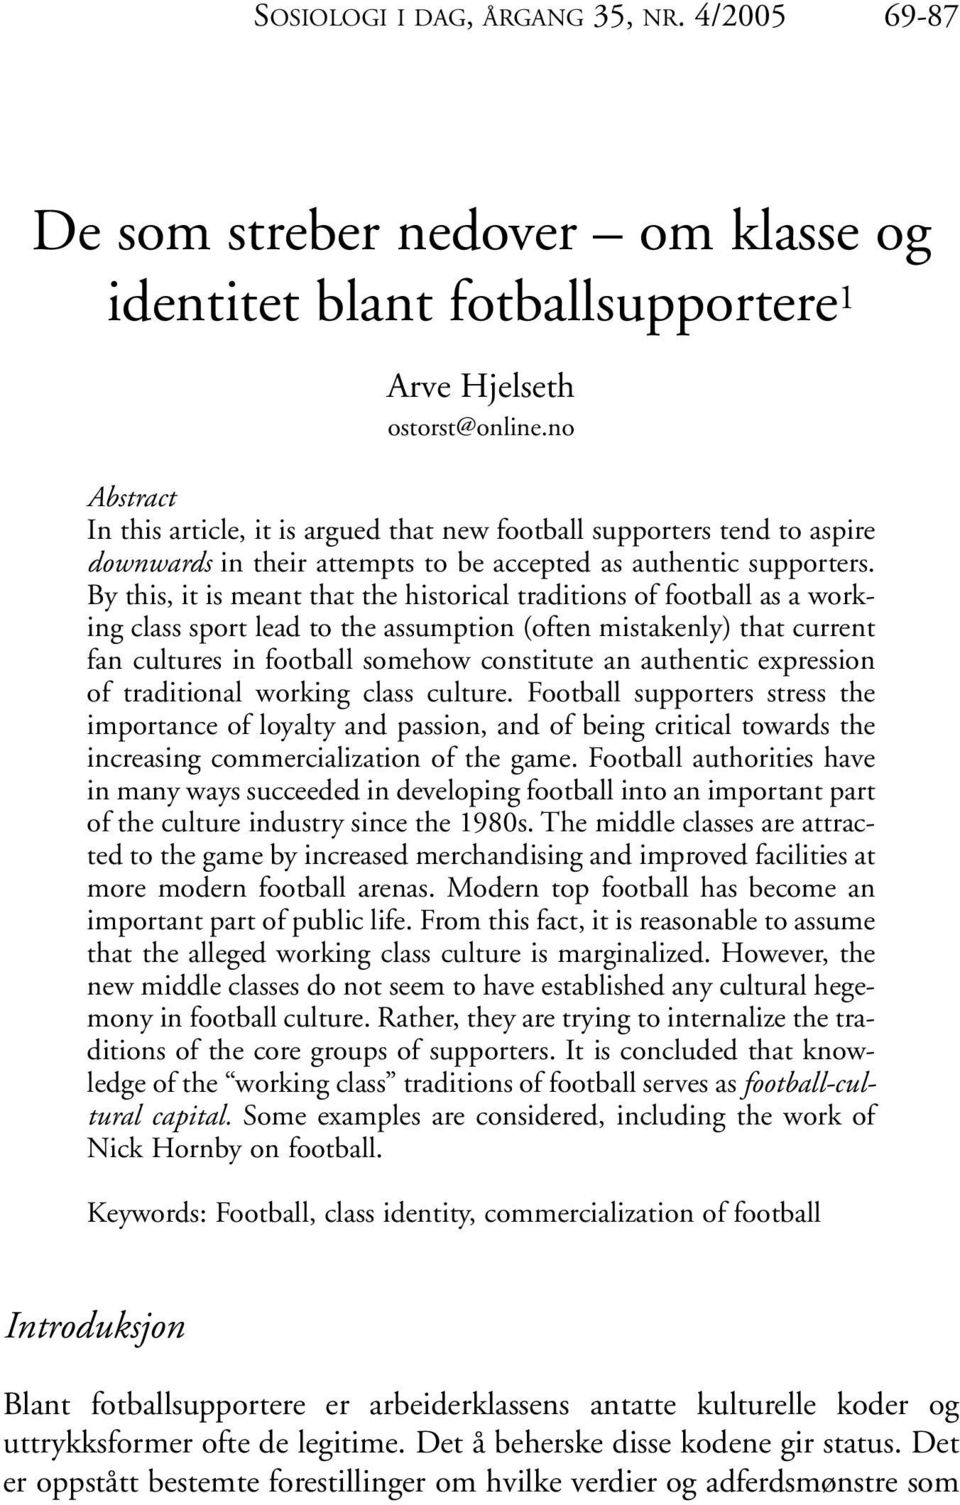 By this, it is meant that the historical traditions of football as a working class sport lead to the assumption (often mistakenly) that current fan cultures in football somehow constitute an